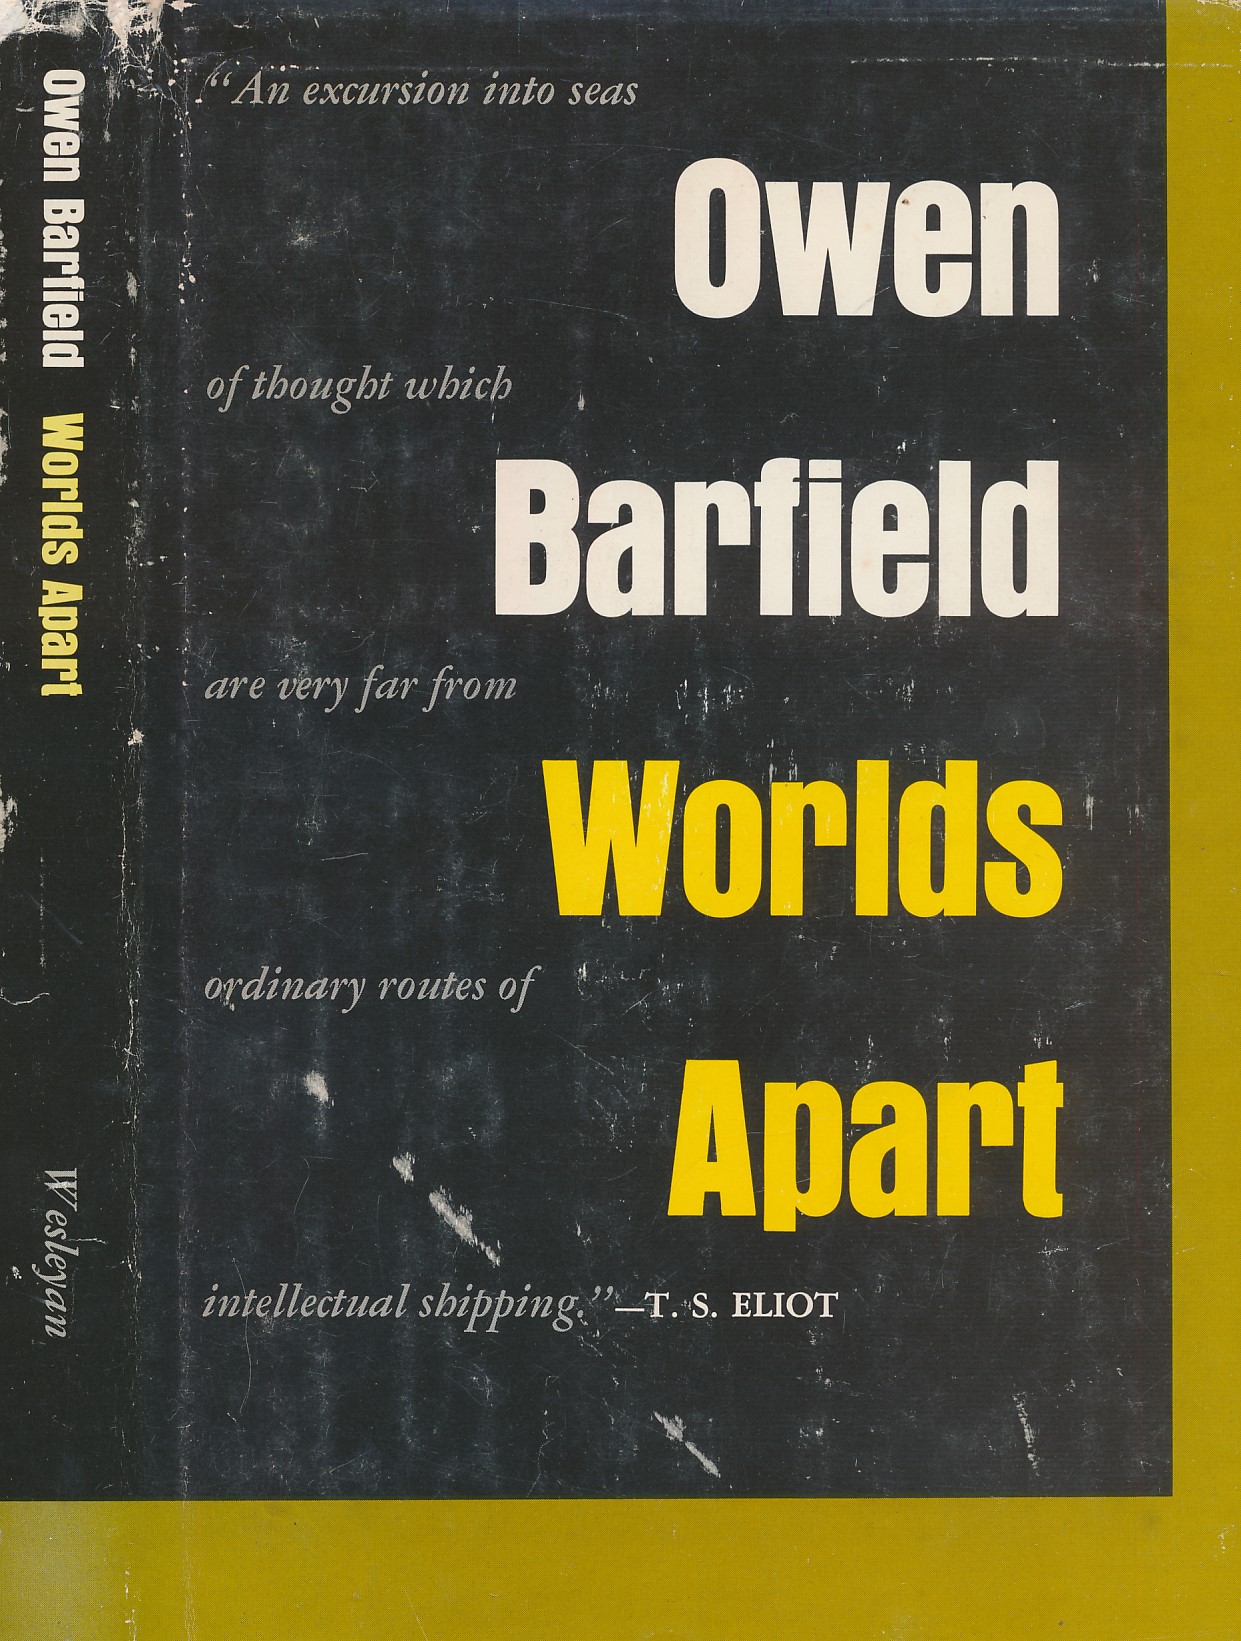 Worlds Apart (A Dialogue of 1960's). Signed copy.